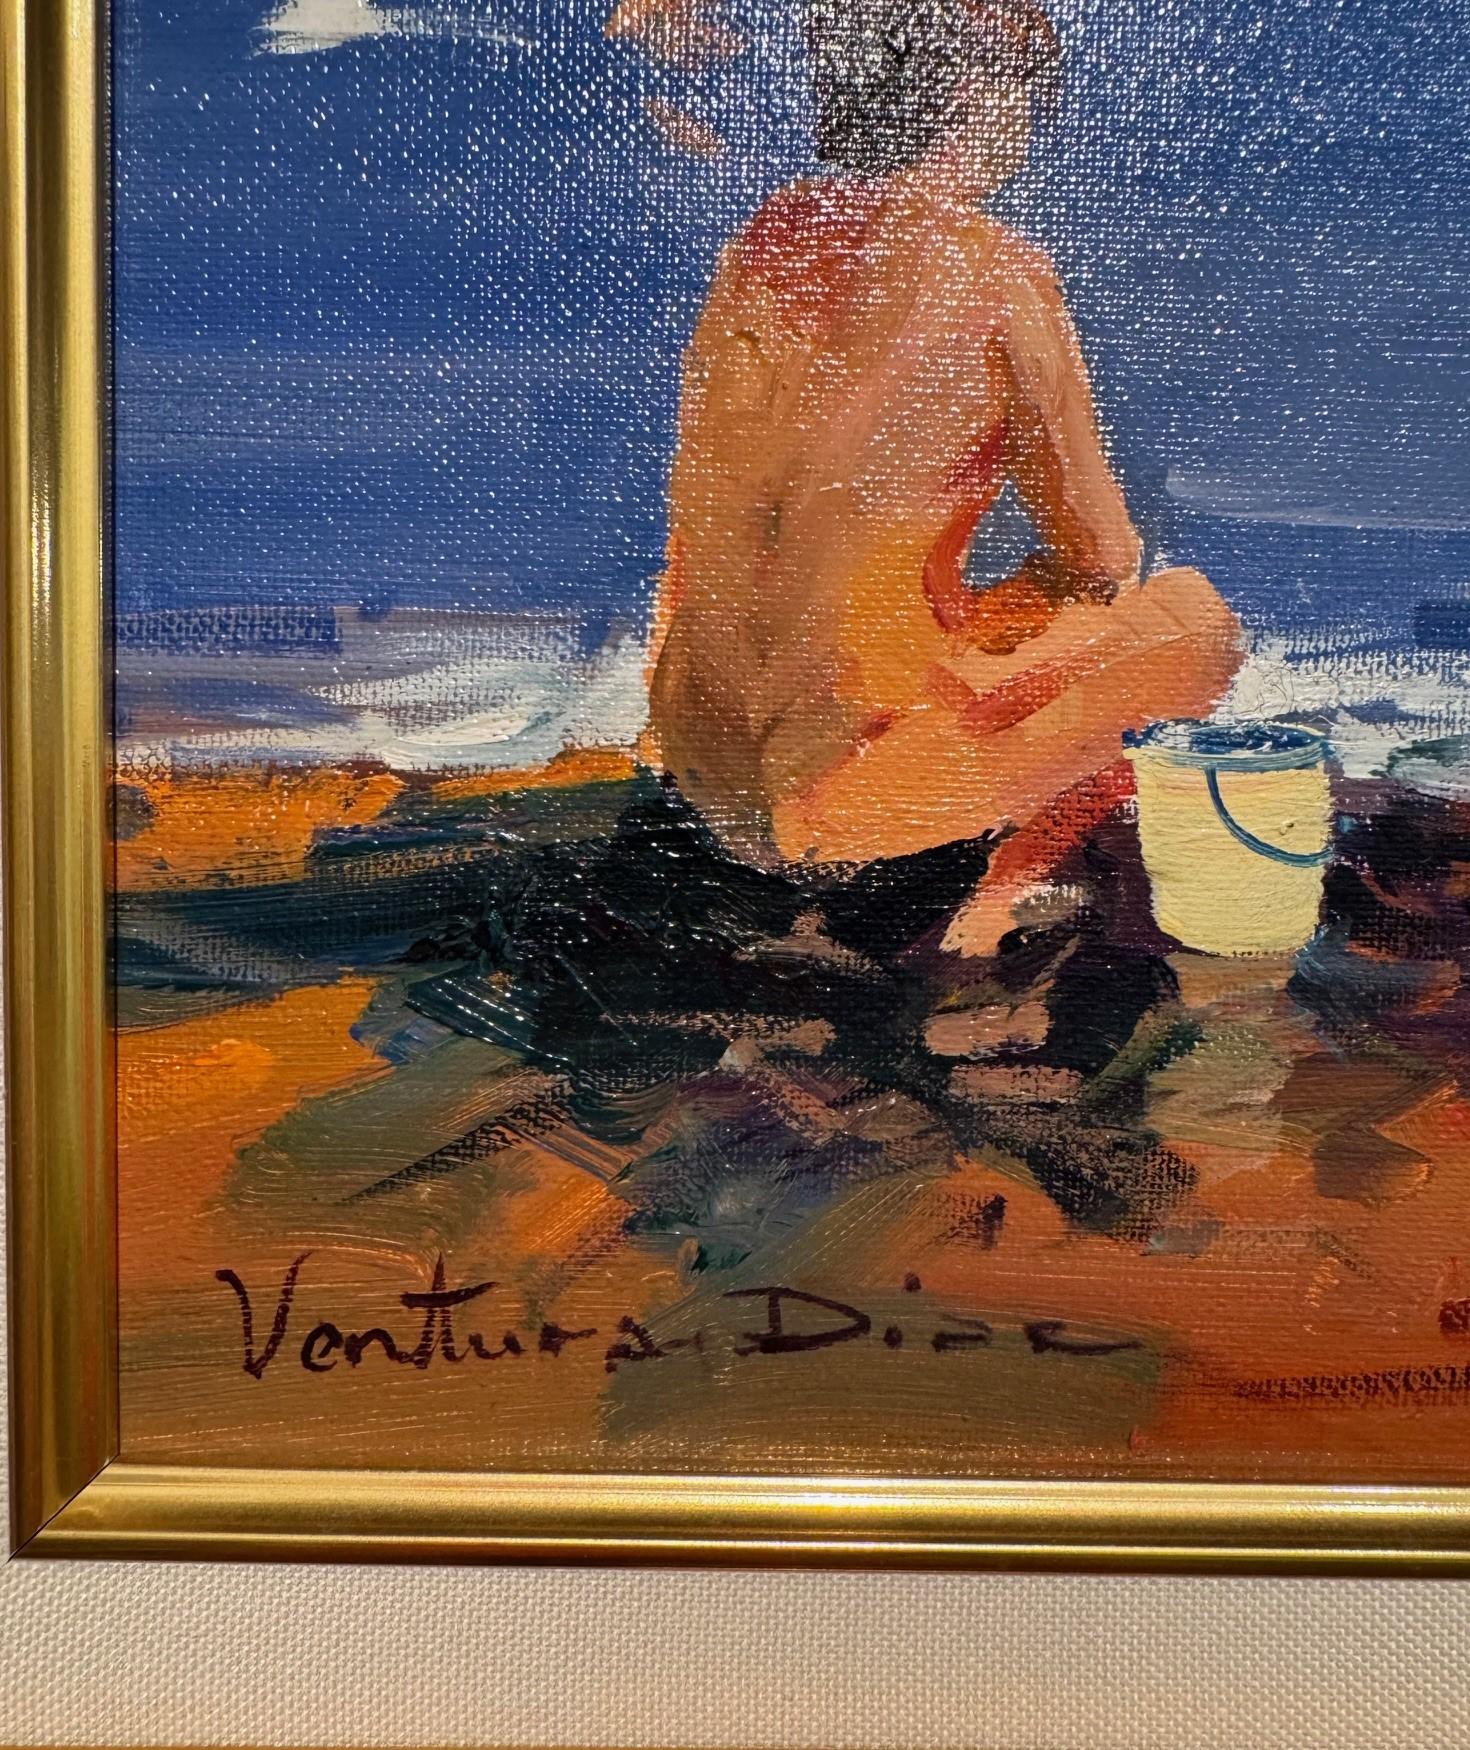 This painting is in excellent condition and has only been shown in galleries. Born in Alcoy, Alicante, Spain in 1948, Ventura Diaz studied in the Fine Arts School in Valencia. His current body of works are inspired by the Valencian style of beach